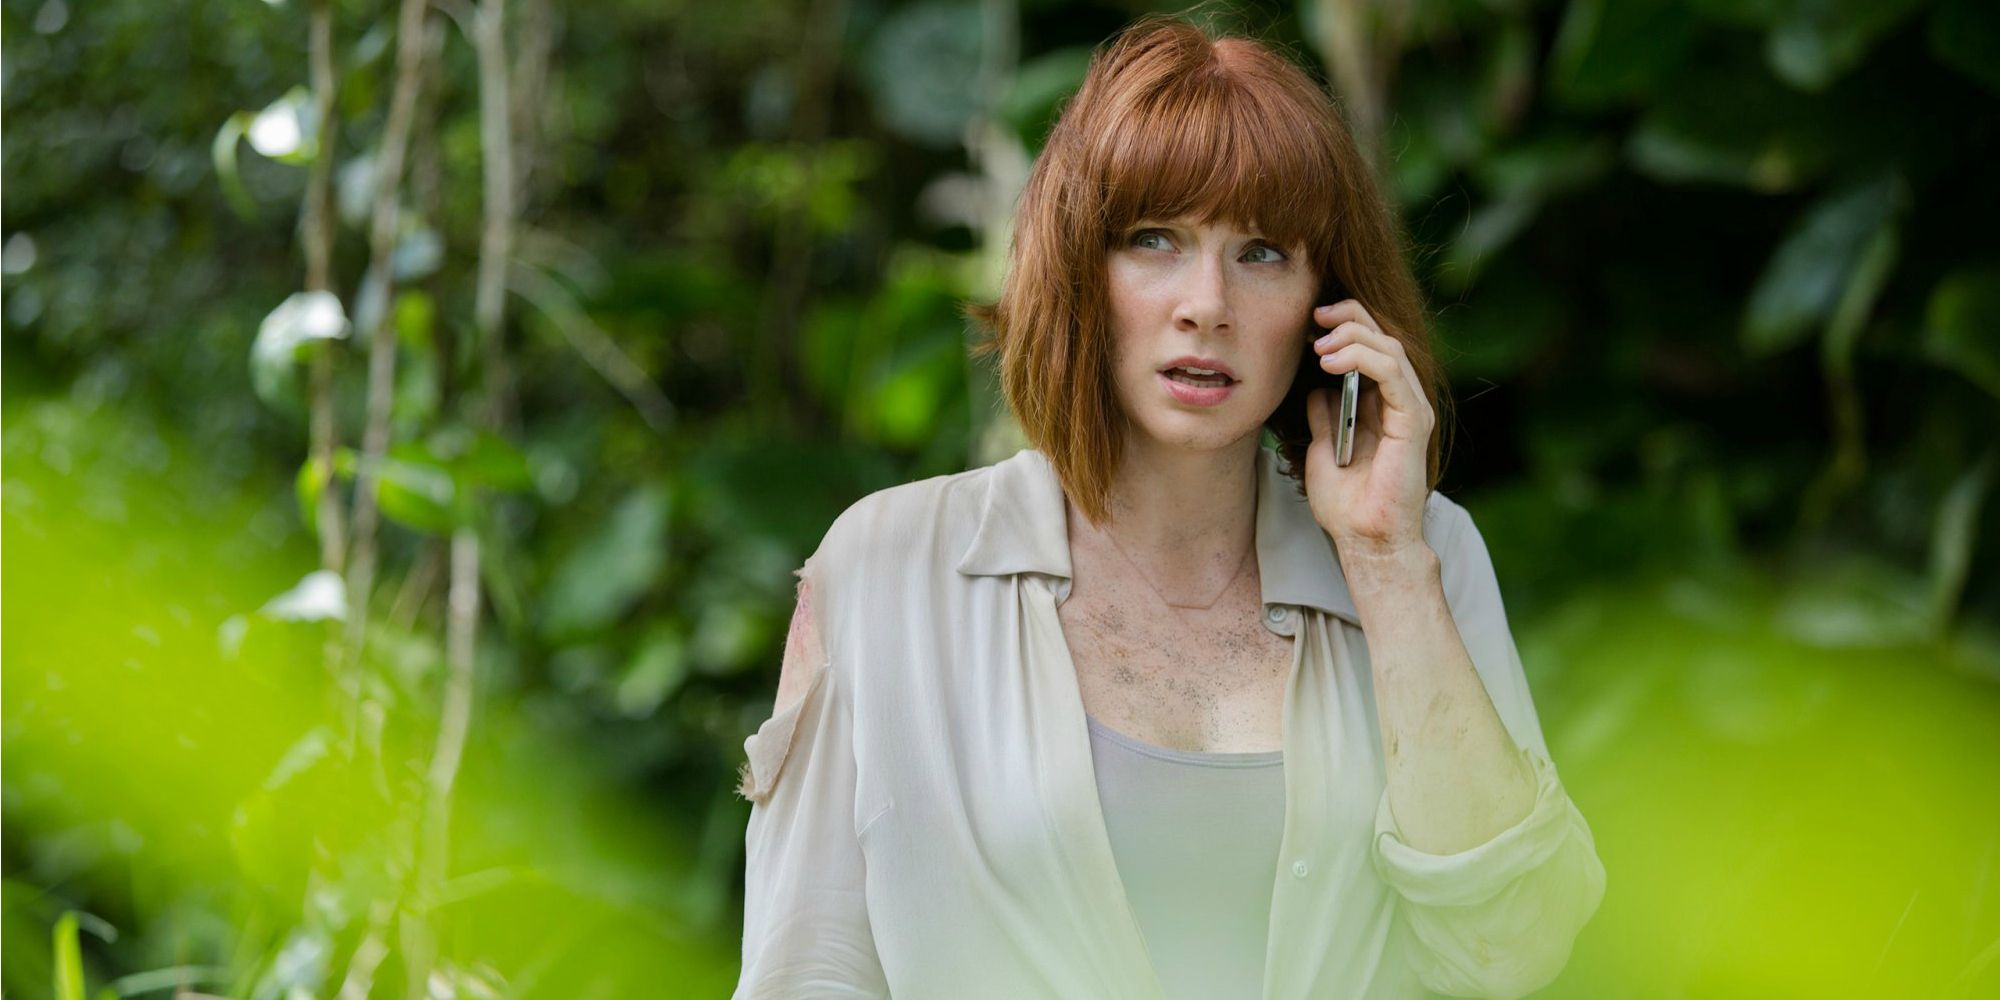 Jurassic World 2: Bryce Dallas Howard Teases Surprising Story Direction